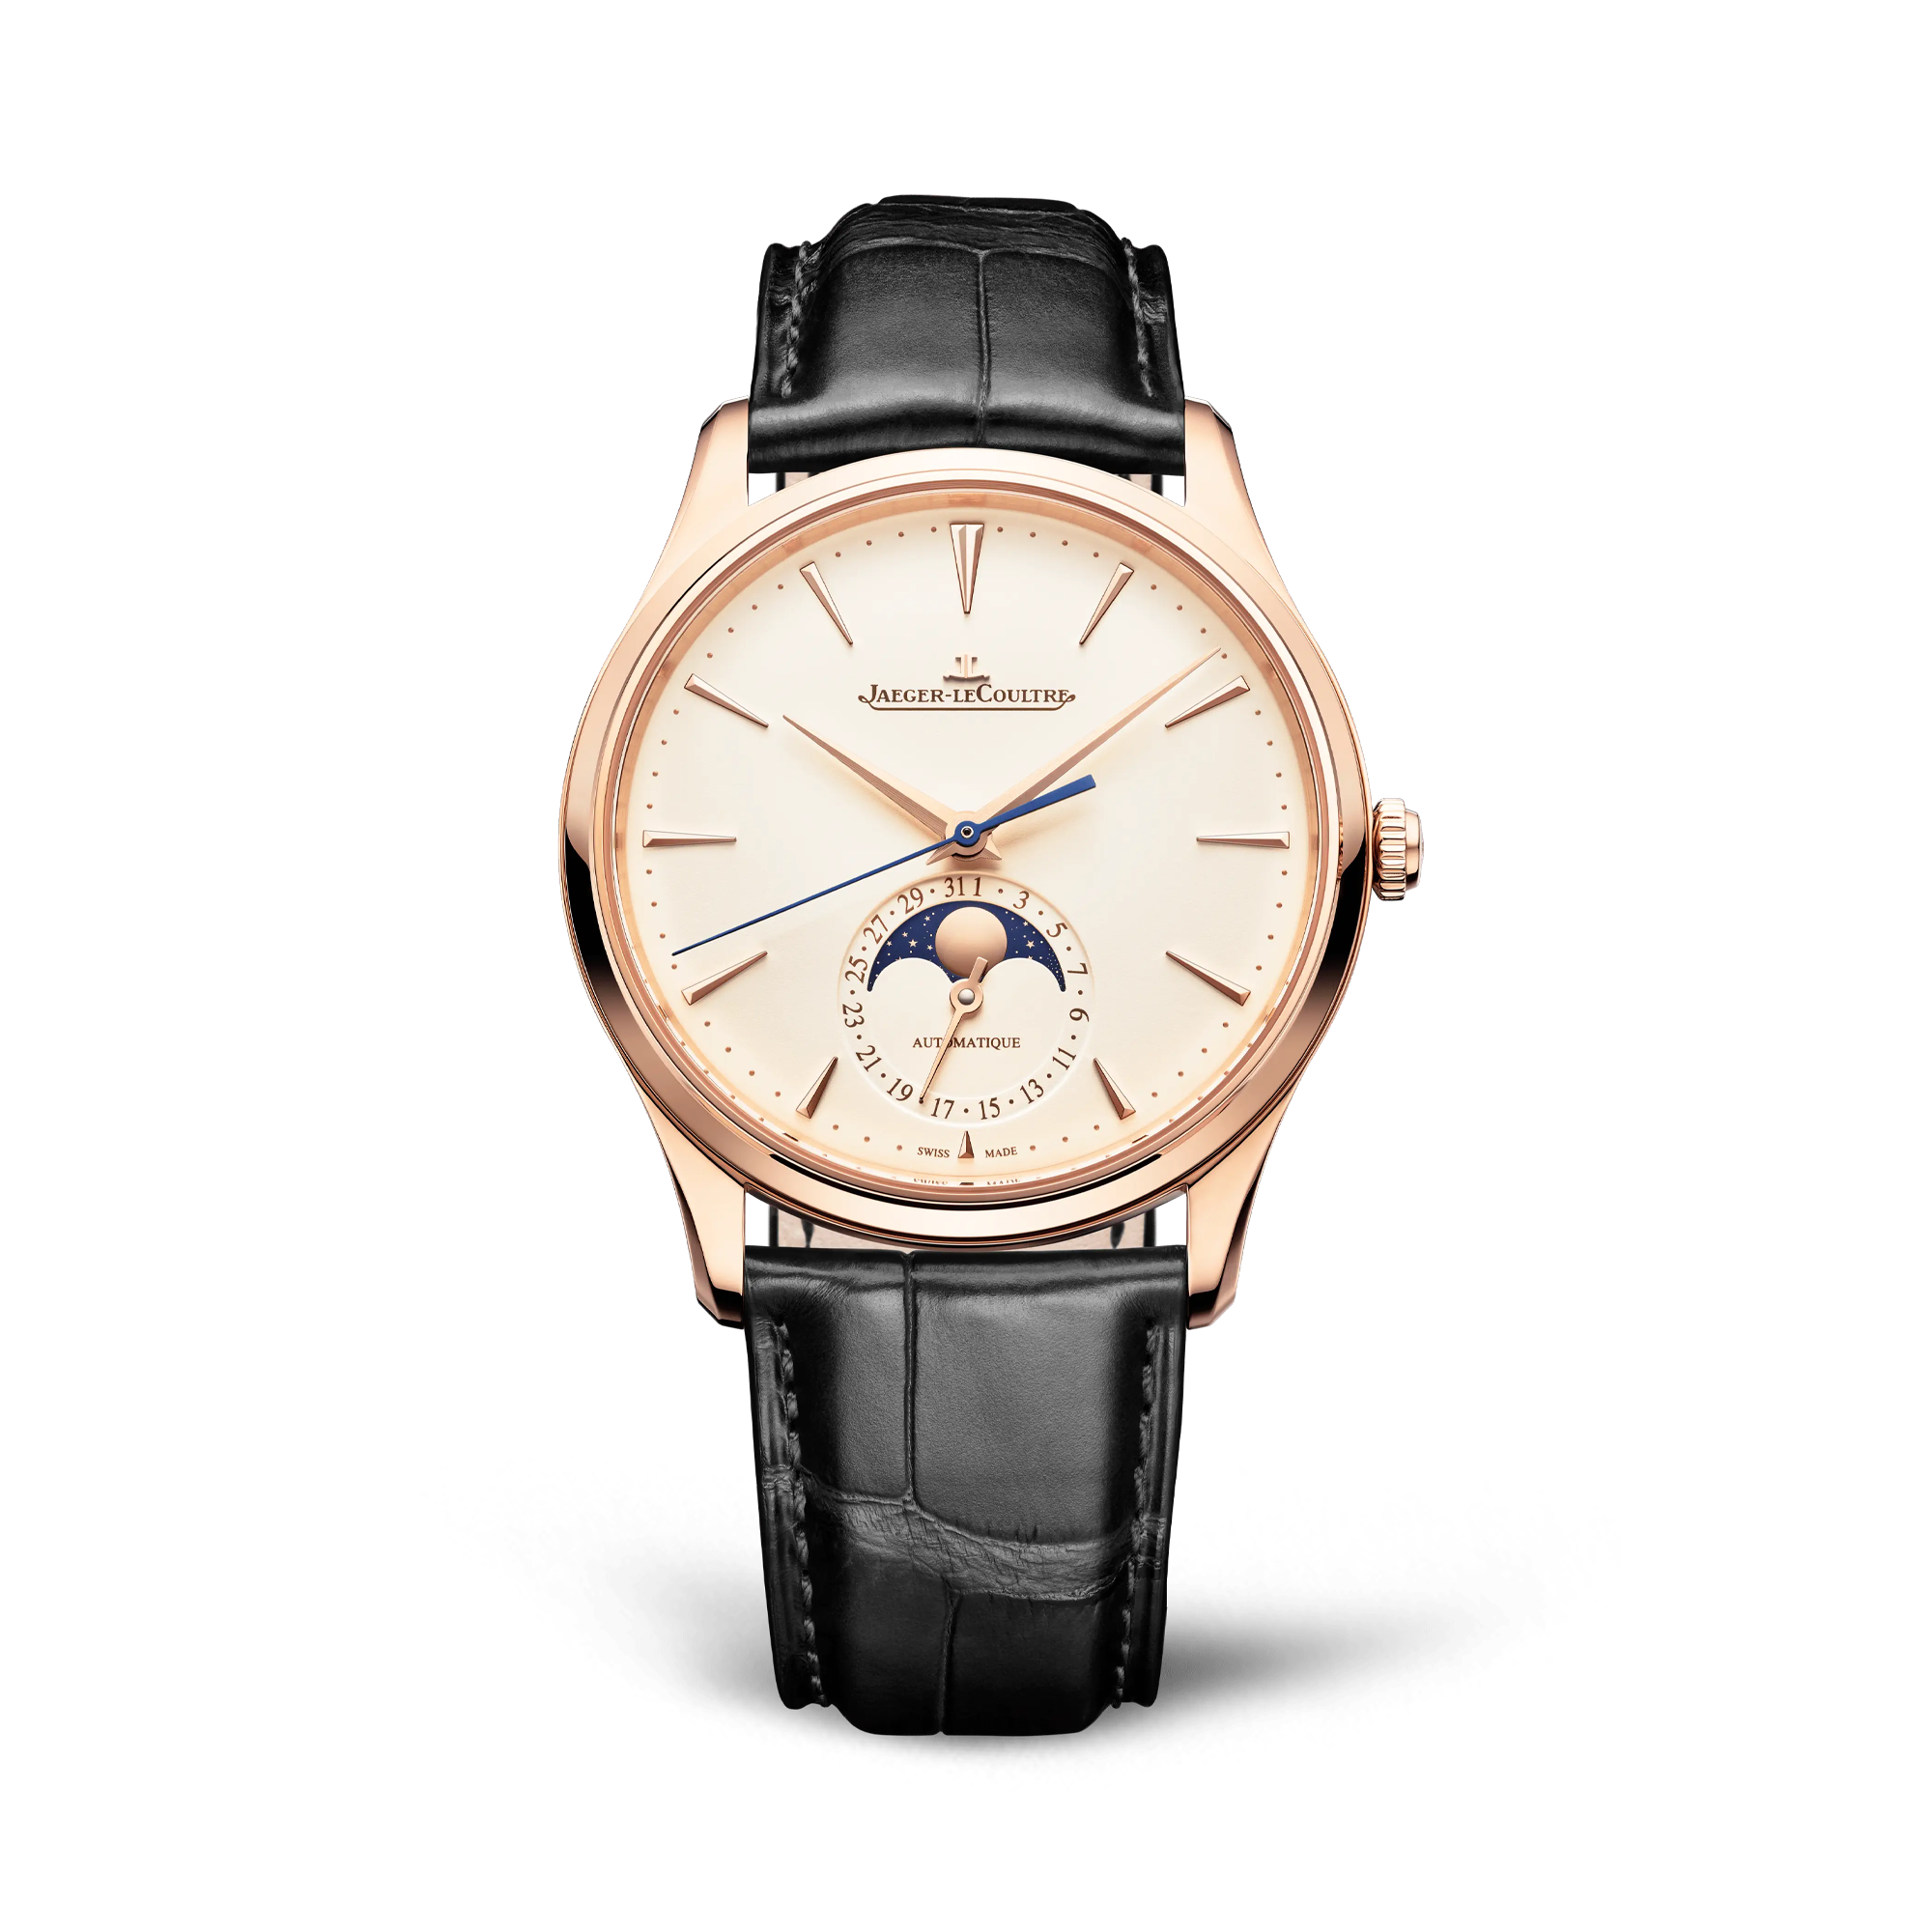 Jaeger-LeCoultre Master Ultra Thin 39mm, Beige Dial, Baton Numerals_1